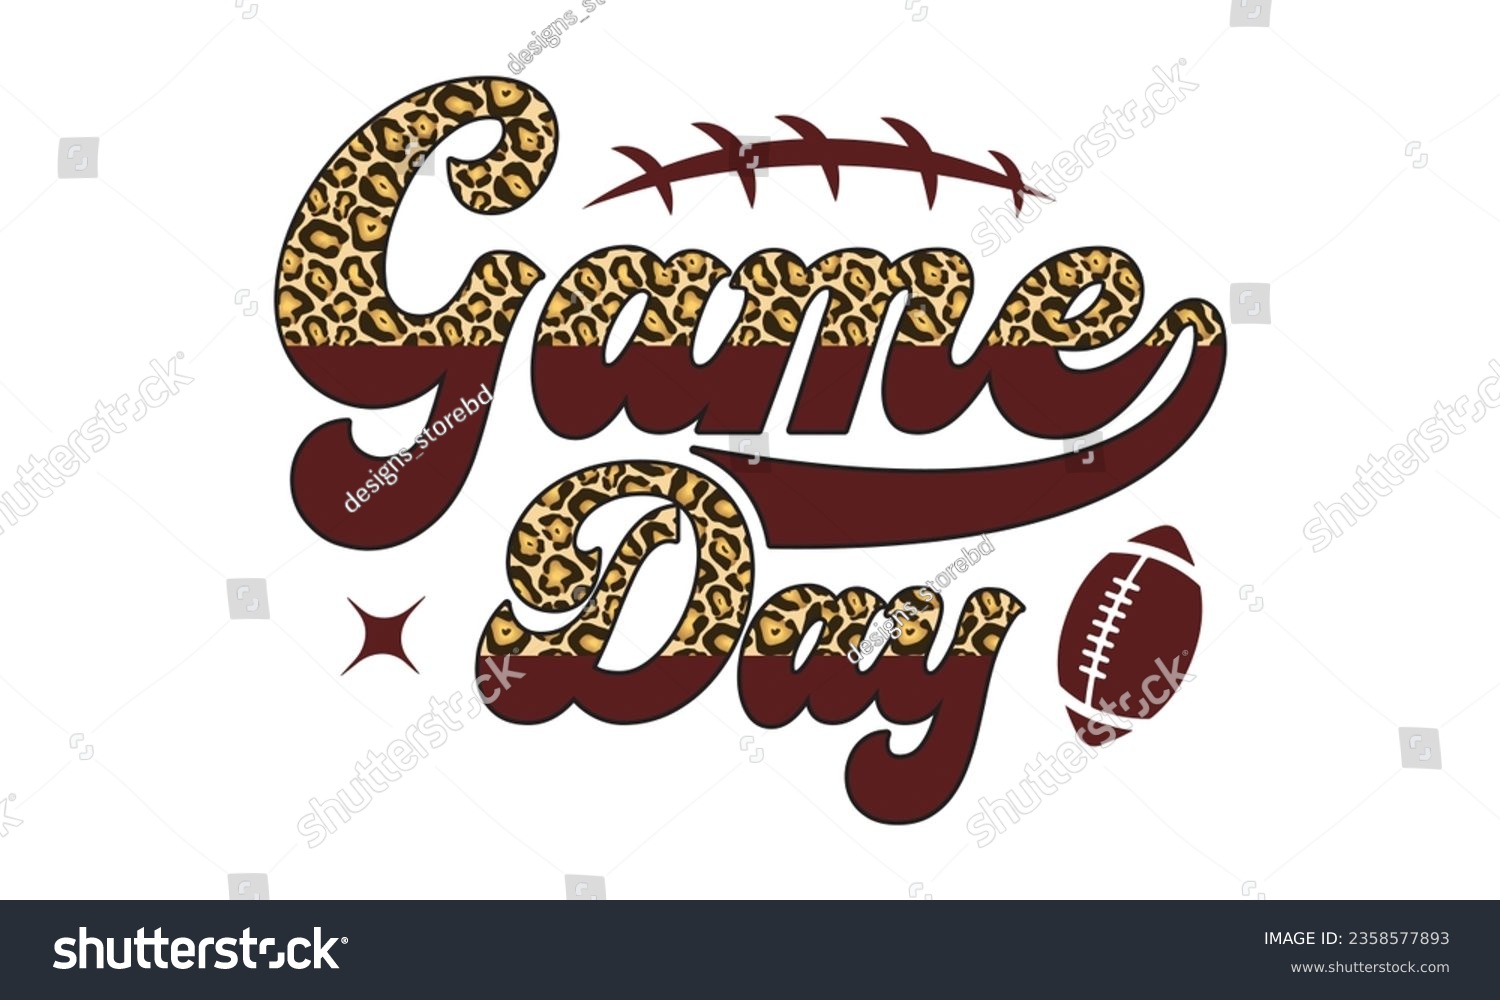 SVG of Game day svg, Football SVG, Football T-shirt Design Template SVG Cut File Typography, Files for Cutting Cricut and Silhouette Cut svg File, Game Day eps, png svg